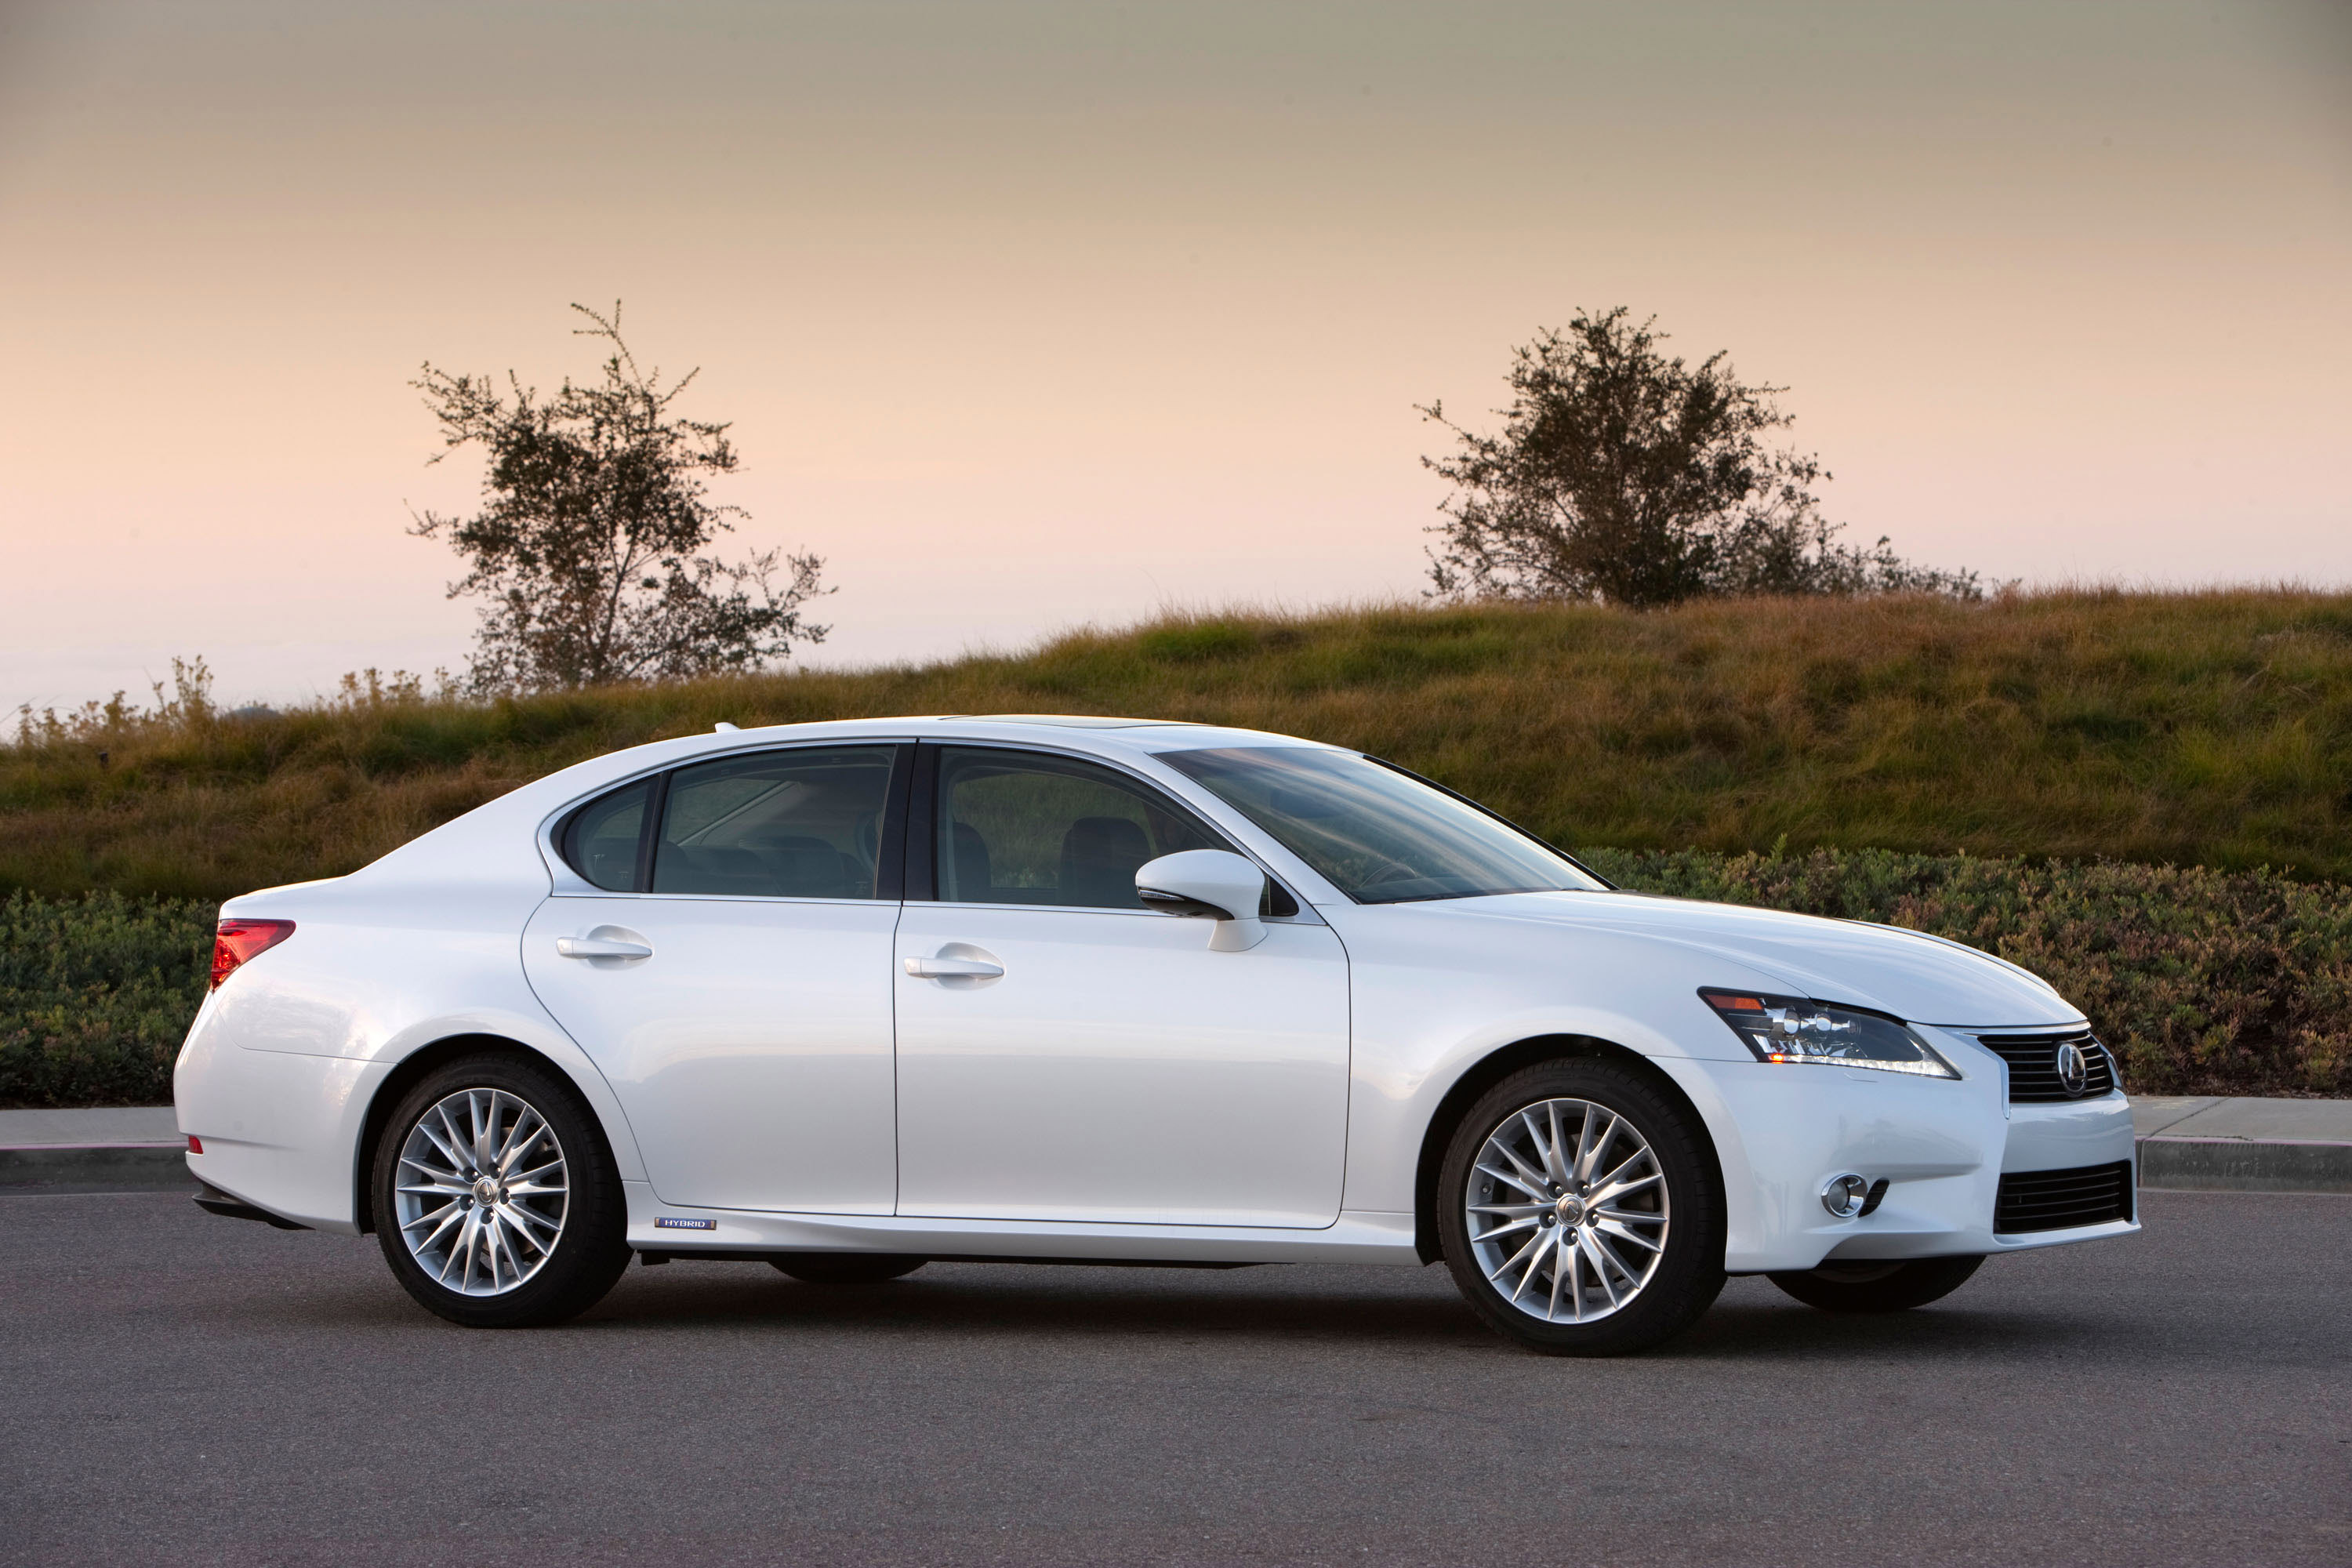 2015 Lexus GS 450h Revs Up Hybrid Driving Performance with New F SPORT  Package - Lexus USA Newsroom